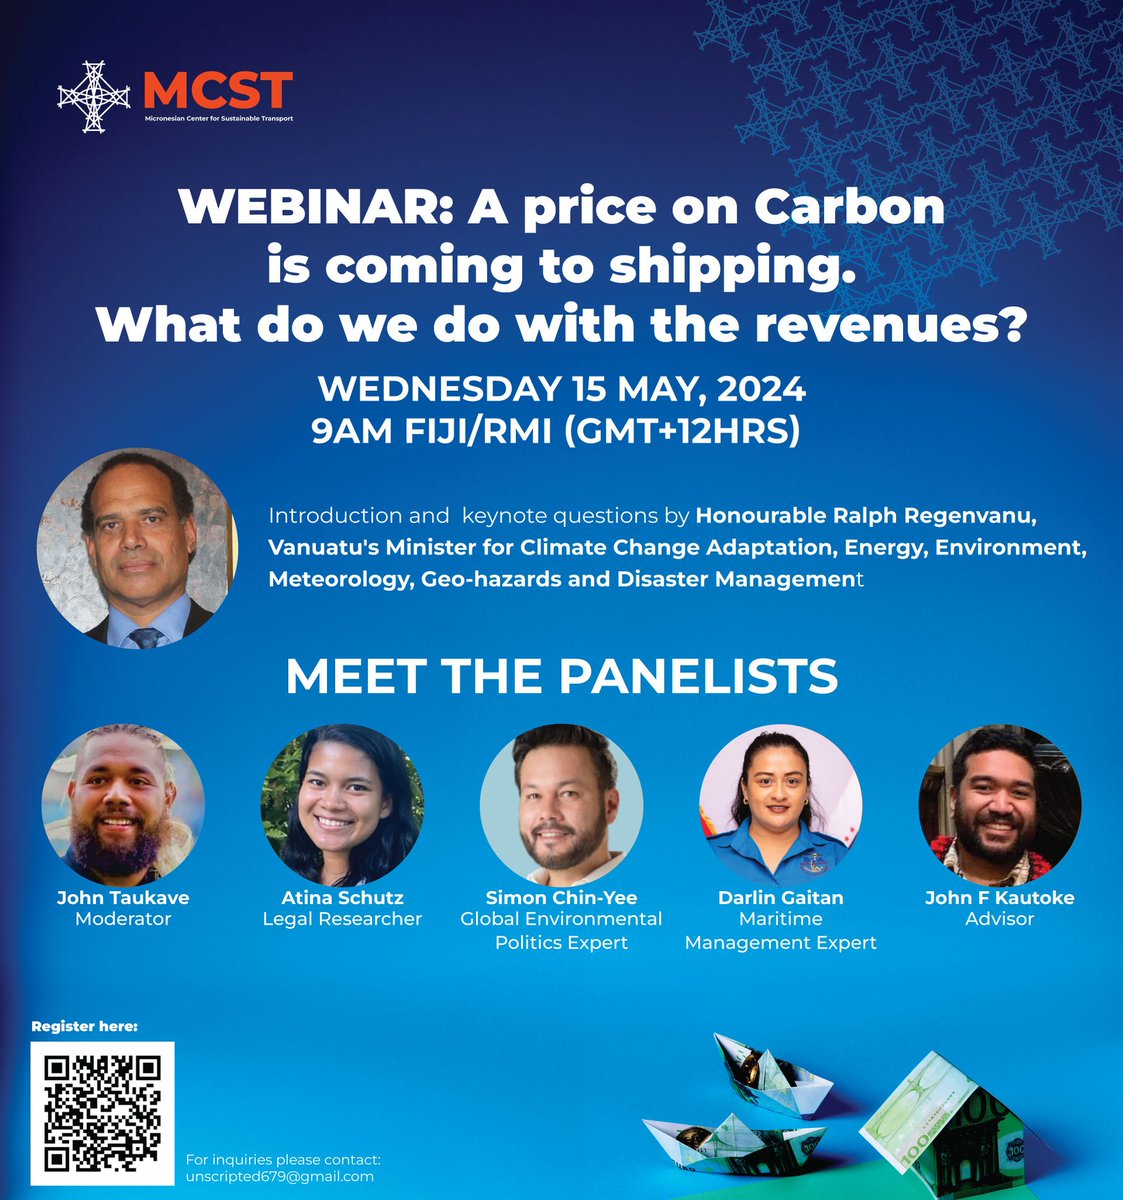 Join MCST on Wednesday May 15, 2024, at 9 am Fiji/RMI time (GMT+12HRS) as we delve into the future of shipping with a price on carbon! What's next after this monumental shift? Let's explore innovative strategies for utilizing carbon revenue. Register now shorturl.at/qADP3